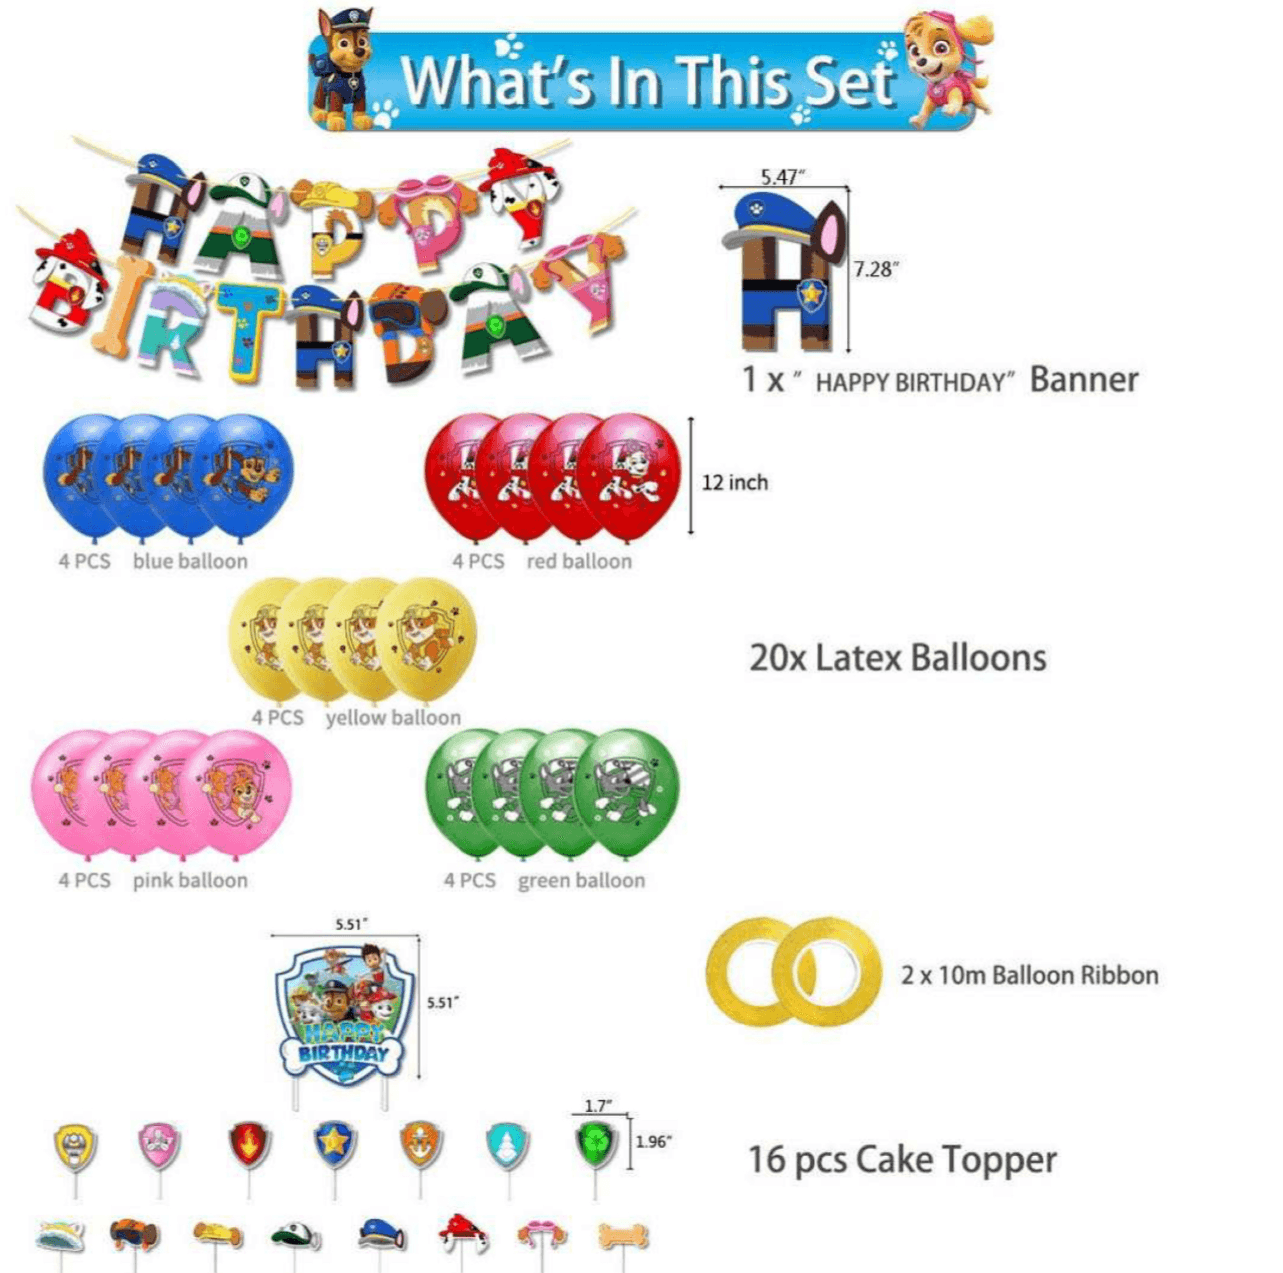 Paw Patrol Balloons & Banner - Expat Life Style